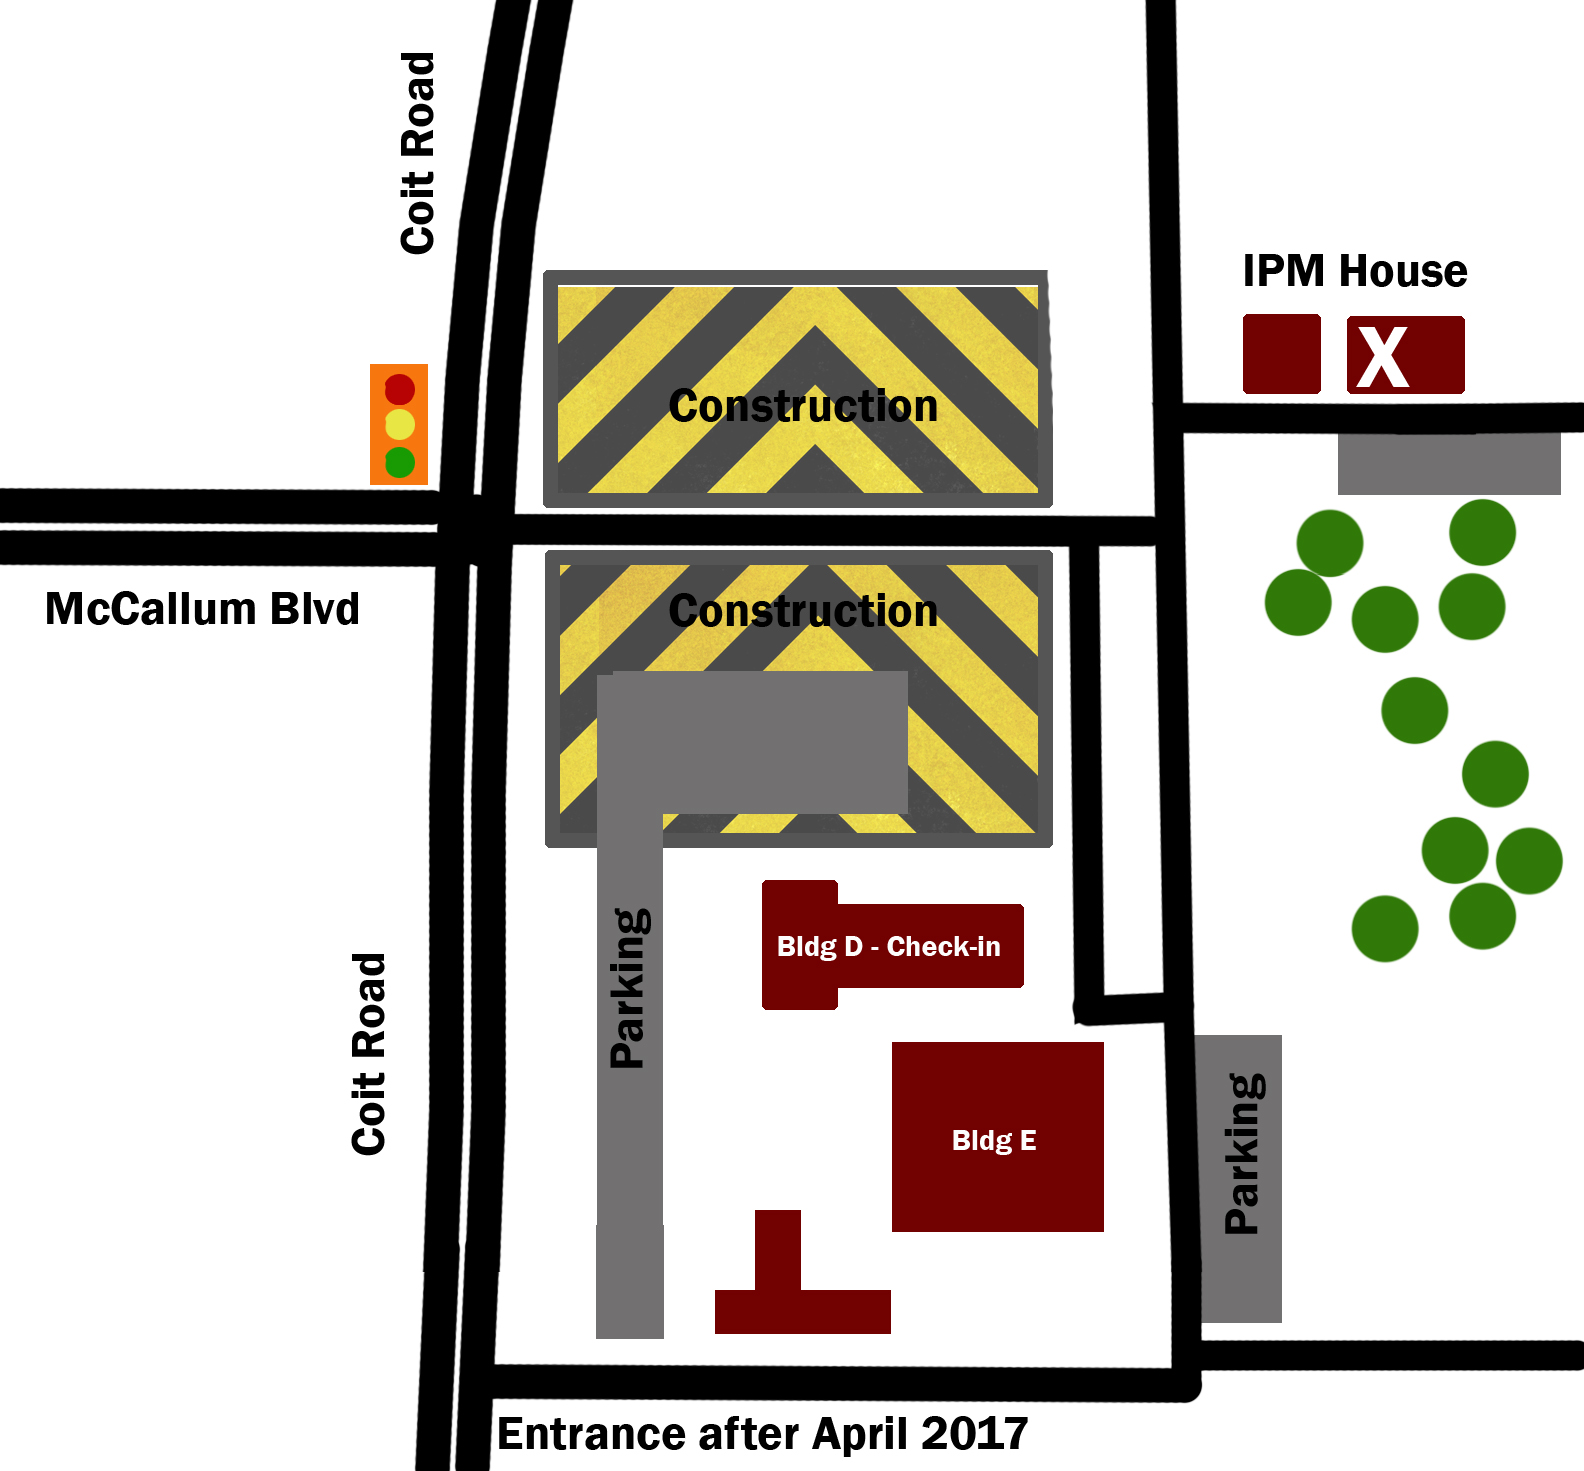 Dallas Center campus map showing IPM House and construction